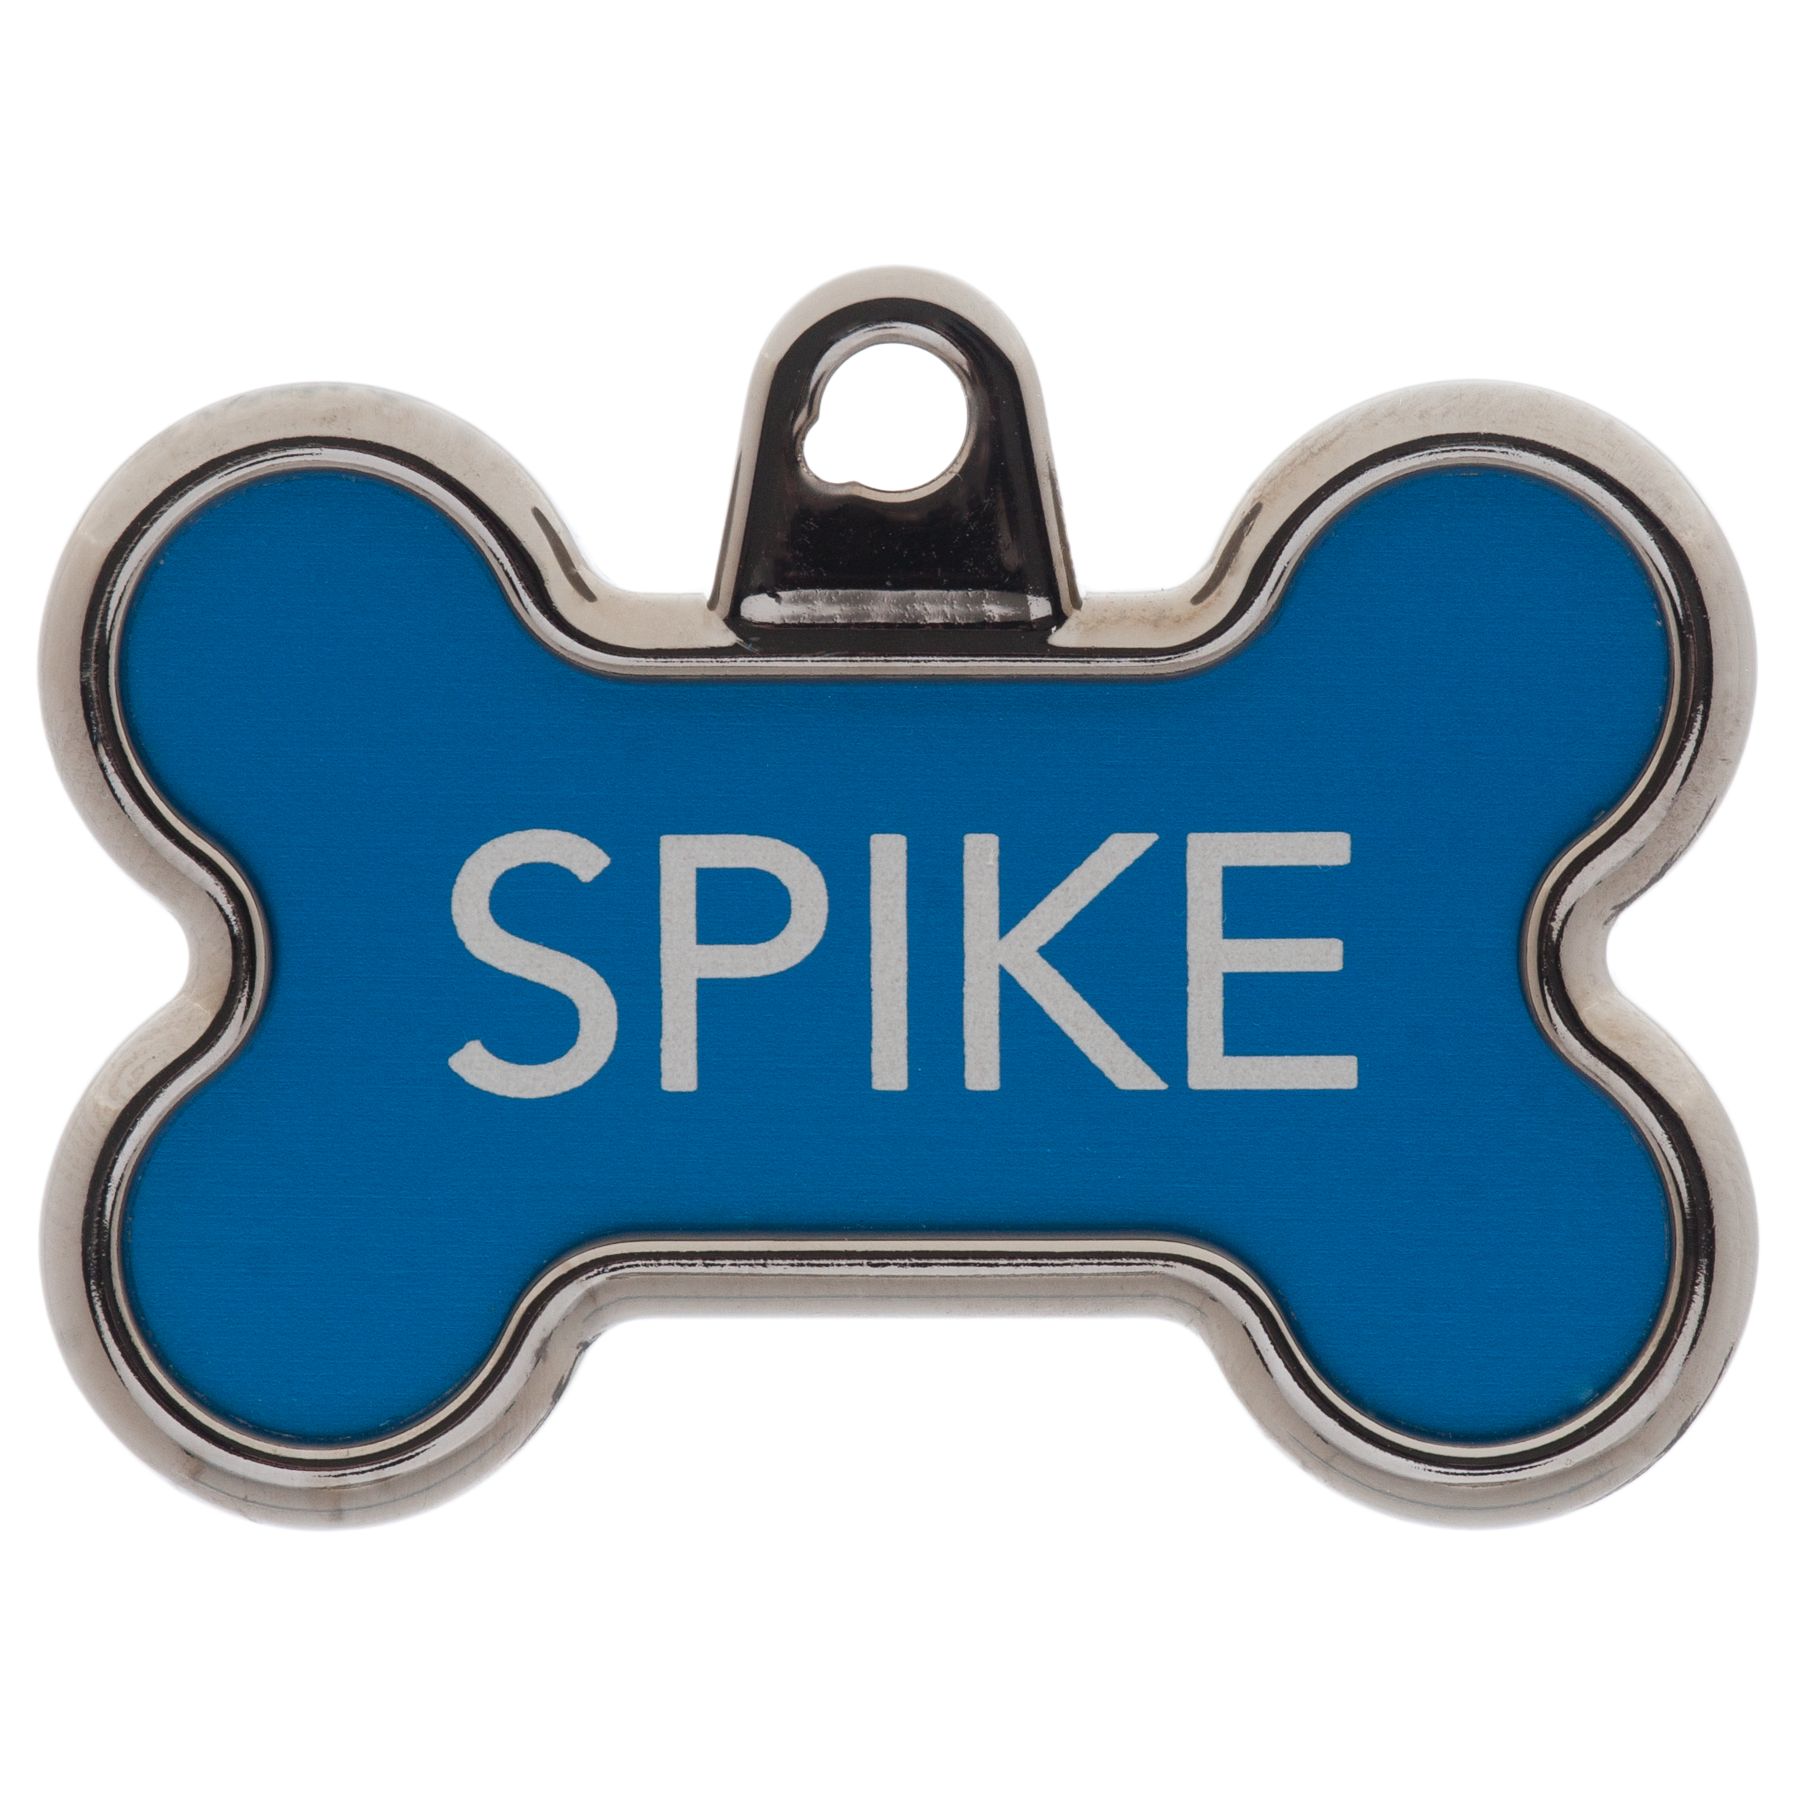 tagworks-elegance-collection-chrome-bone-personalized-pet-id-tag-dog